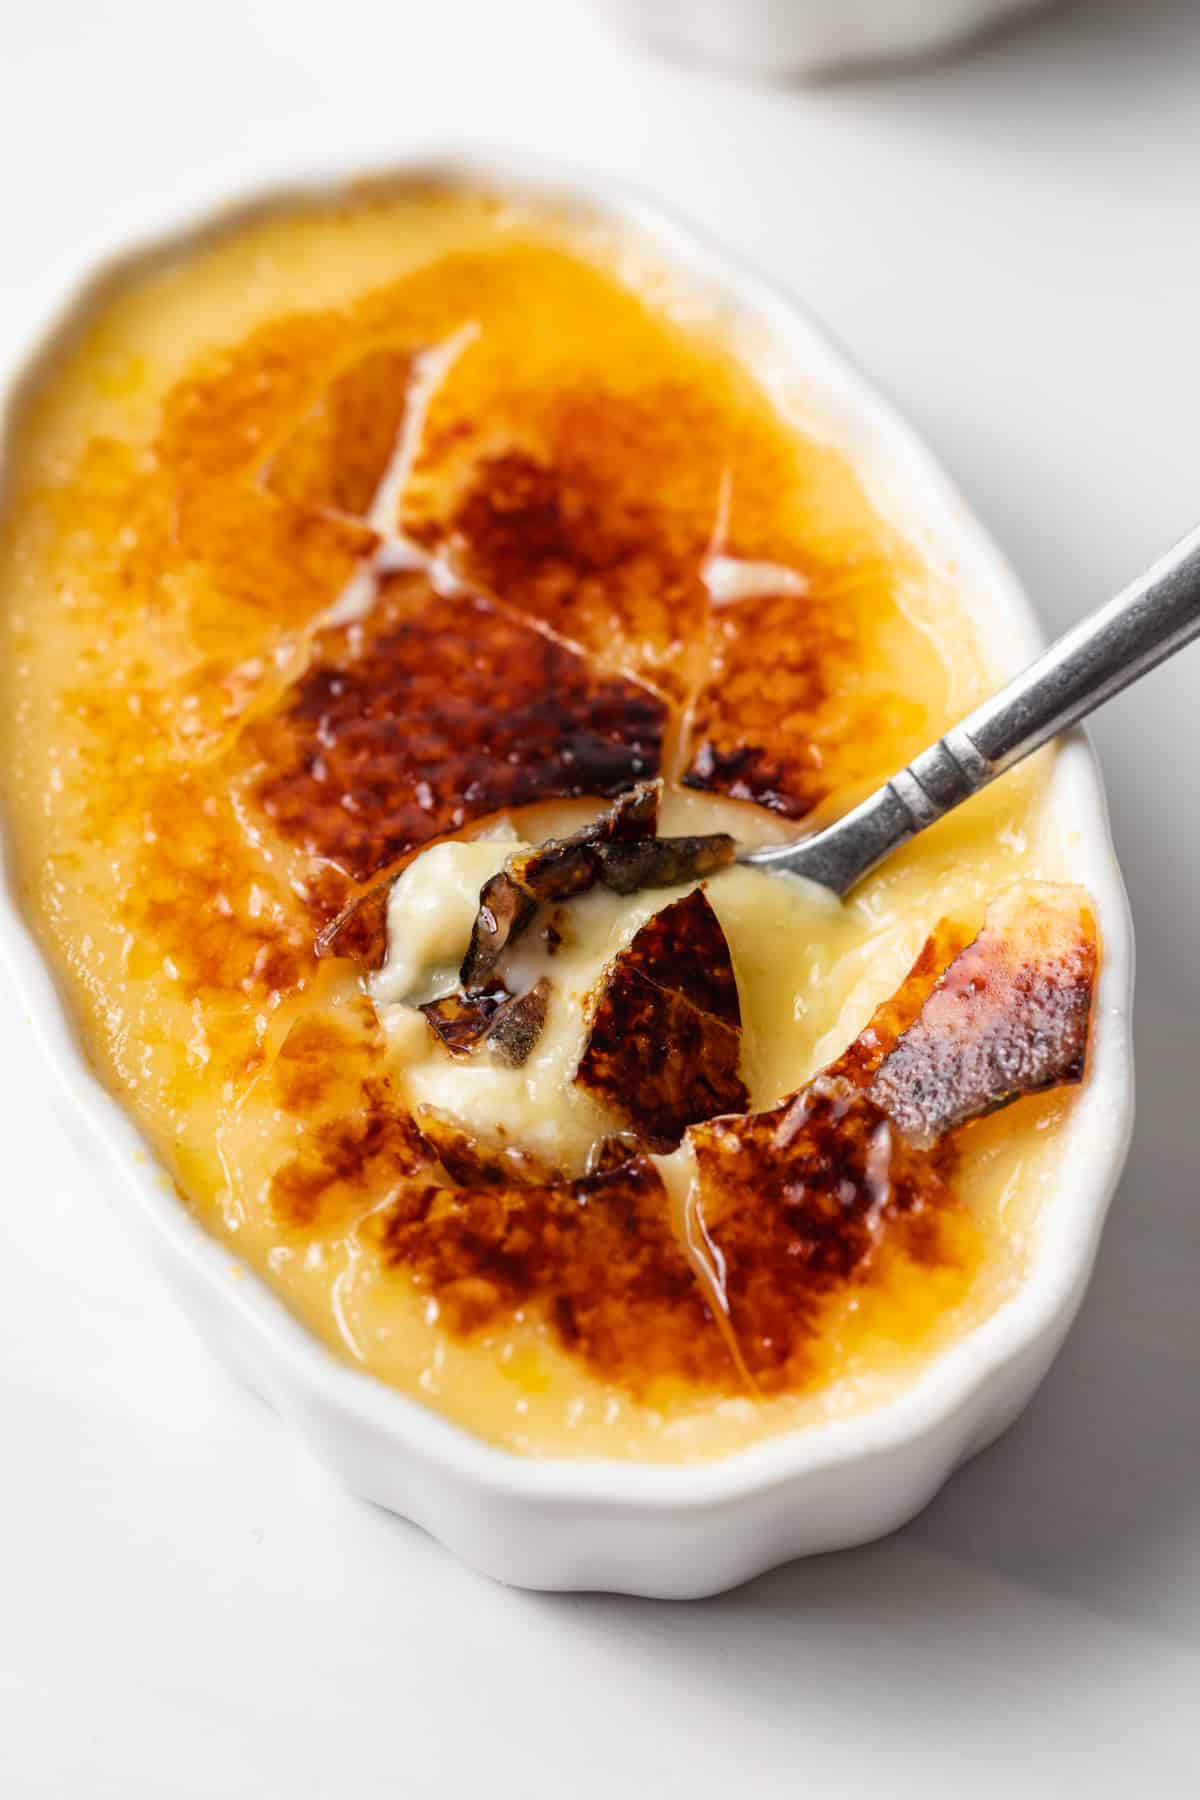 angled view of a spoon cracked through the sugar layer on top of a ramekin of creme brulee